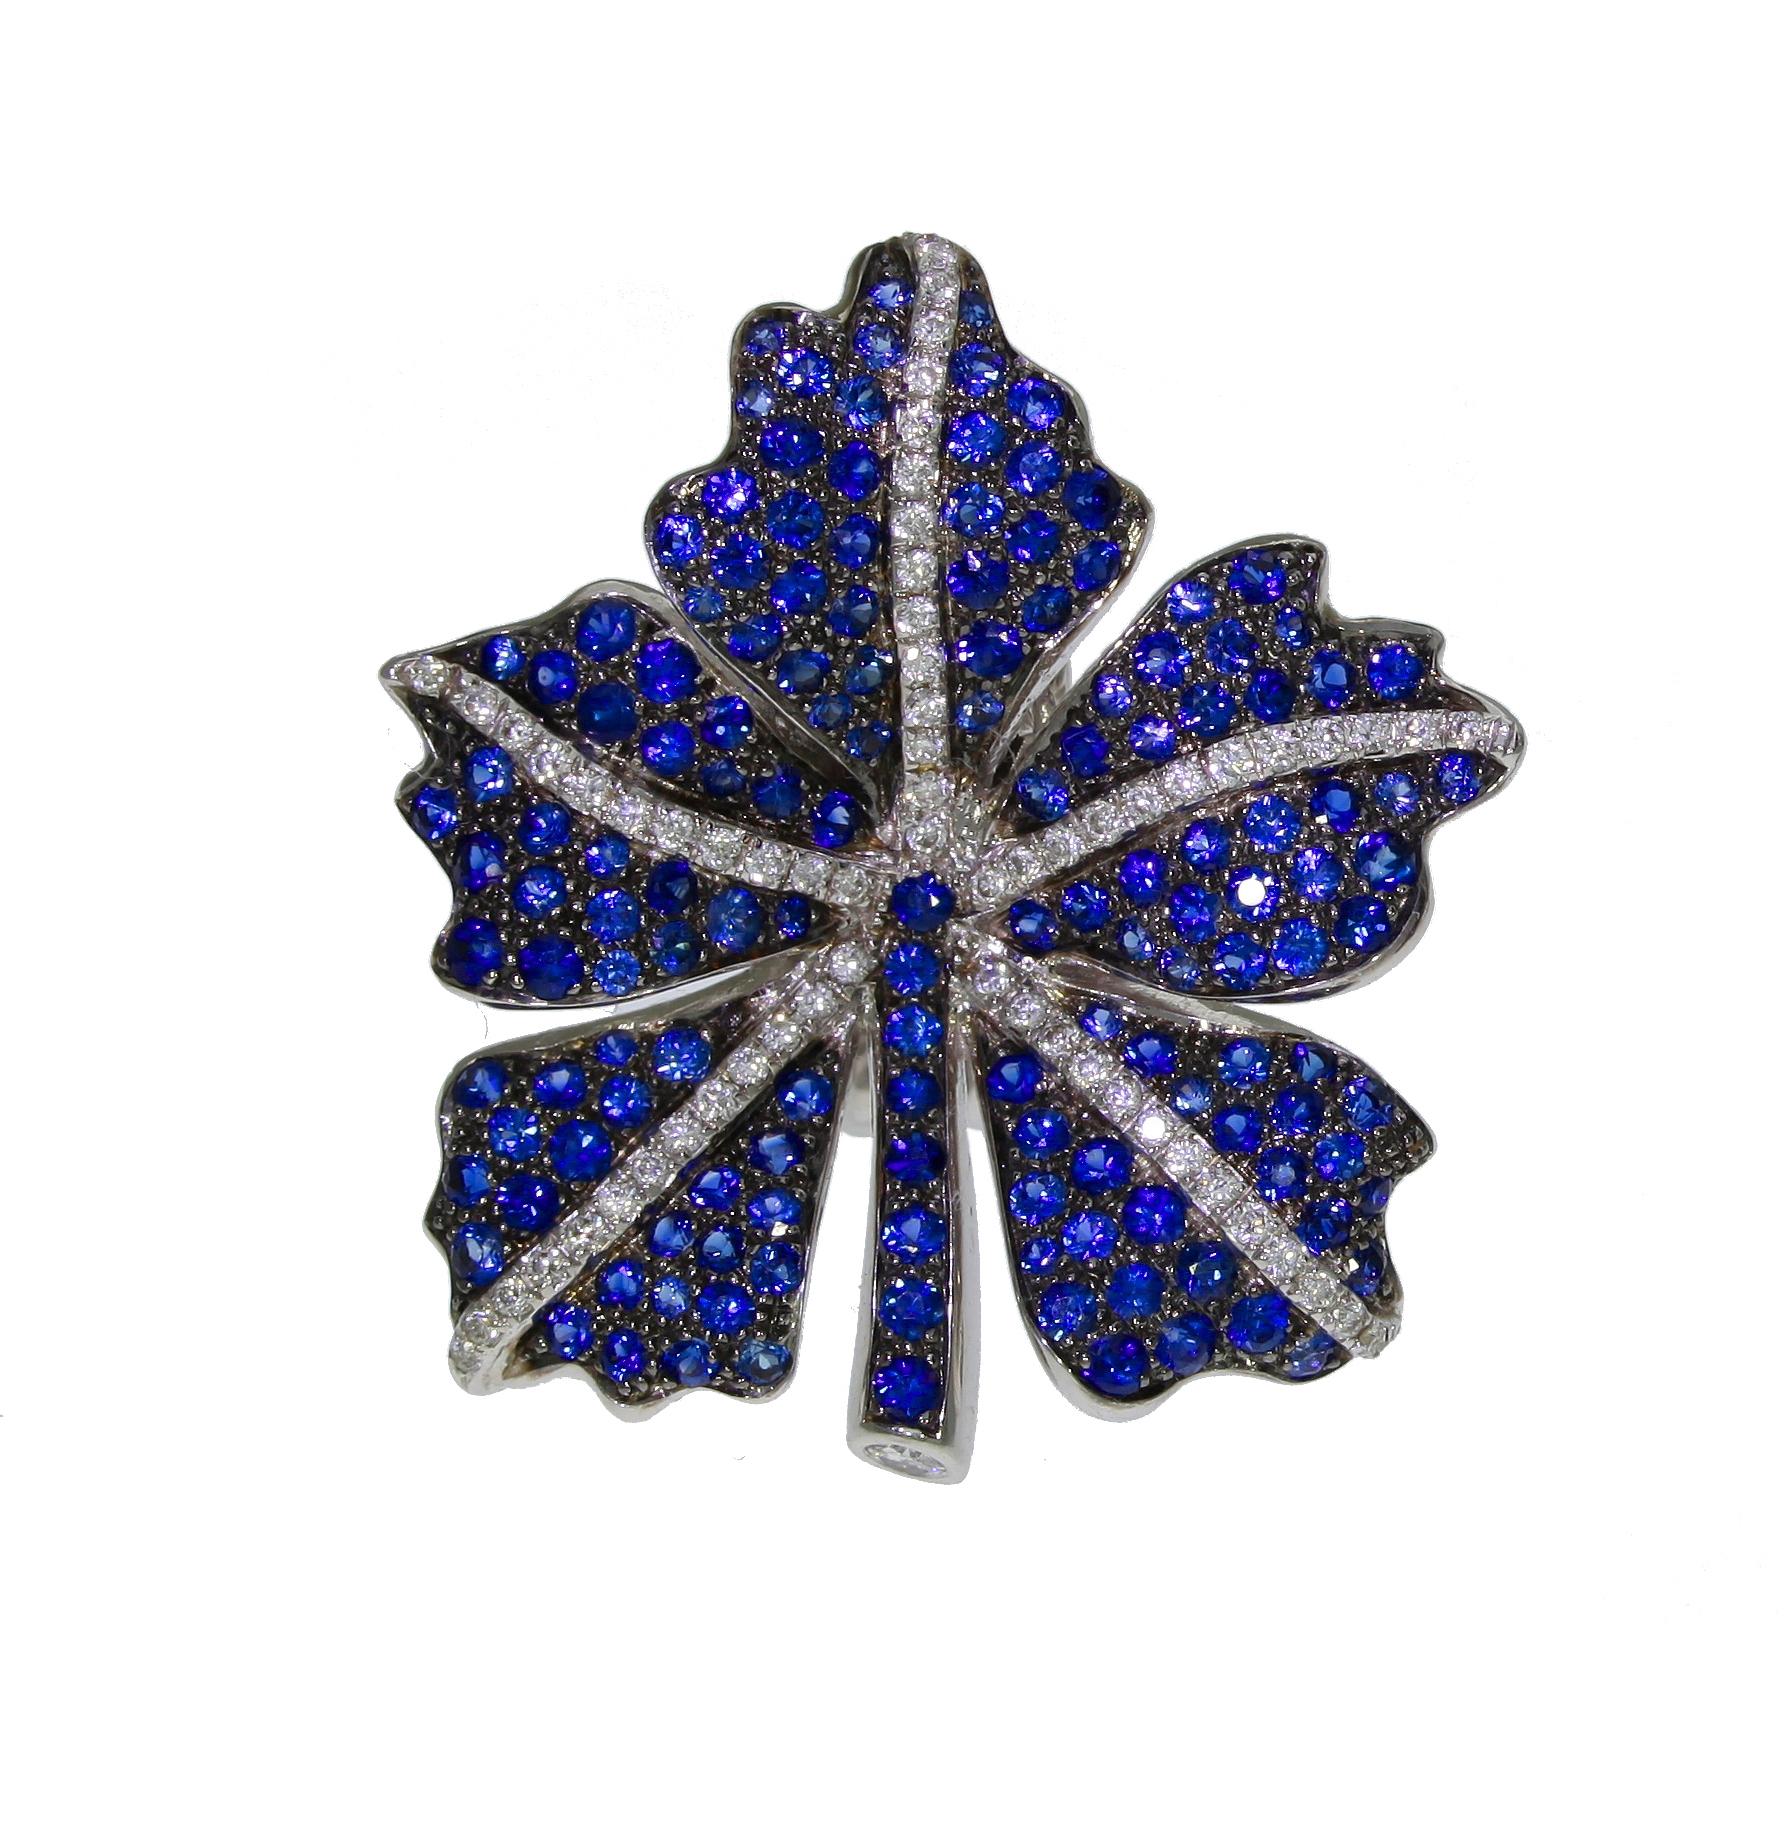 Enchanting and playful clip-on earrings by Chatila with a leaf shaped design. Made from 18-karat white gold and inlaid with blue sapphires and white diamonds. Perfect for those who like statement jewelry.

Details:

- 130 Diamonds with a total